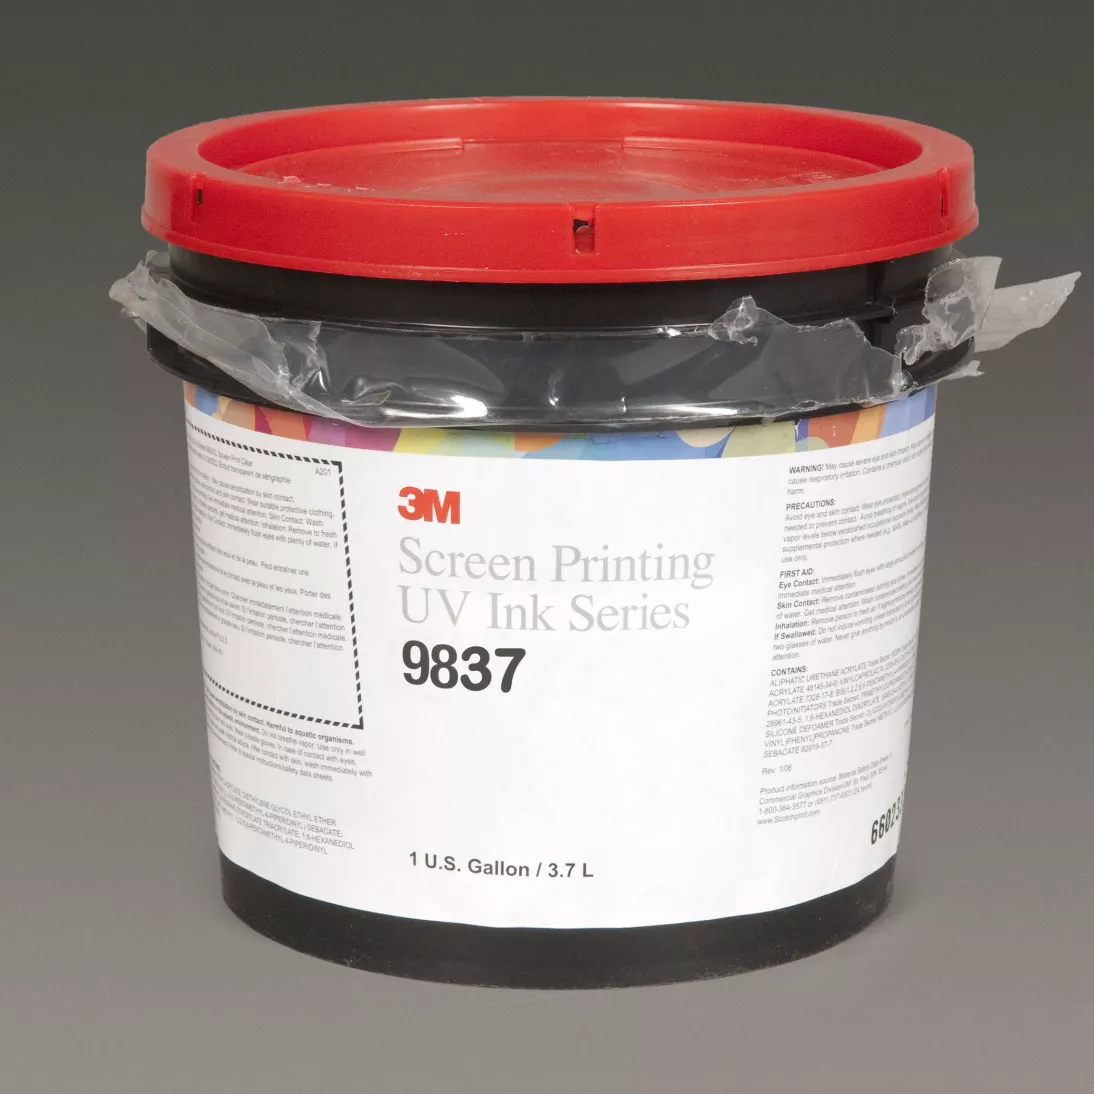 3M™ Screen Printing UV Ink 9837, Red Shade Yellow, 1 Gallon Container